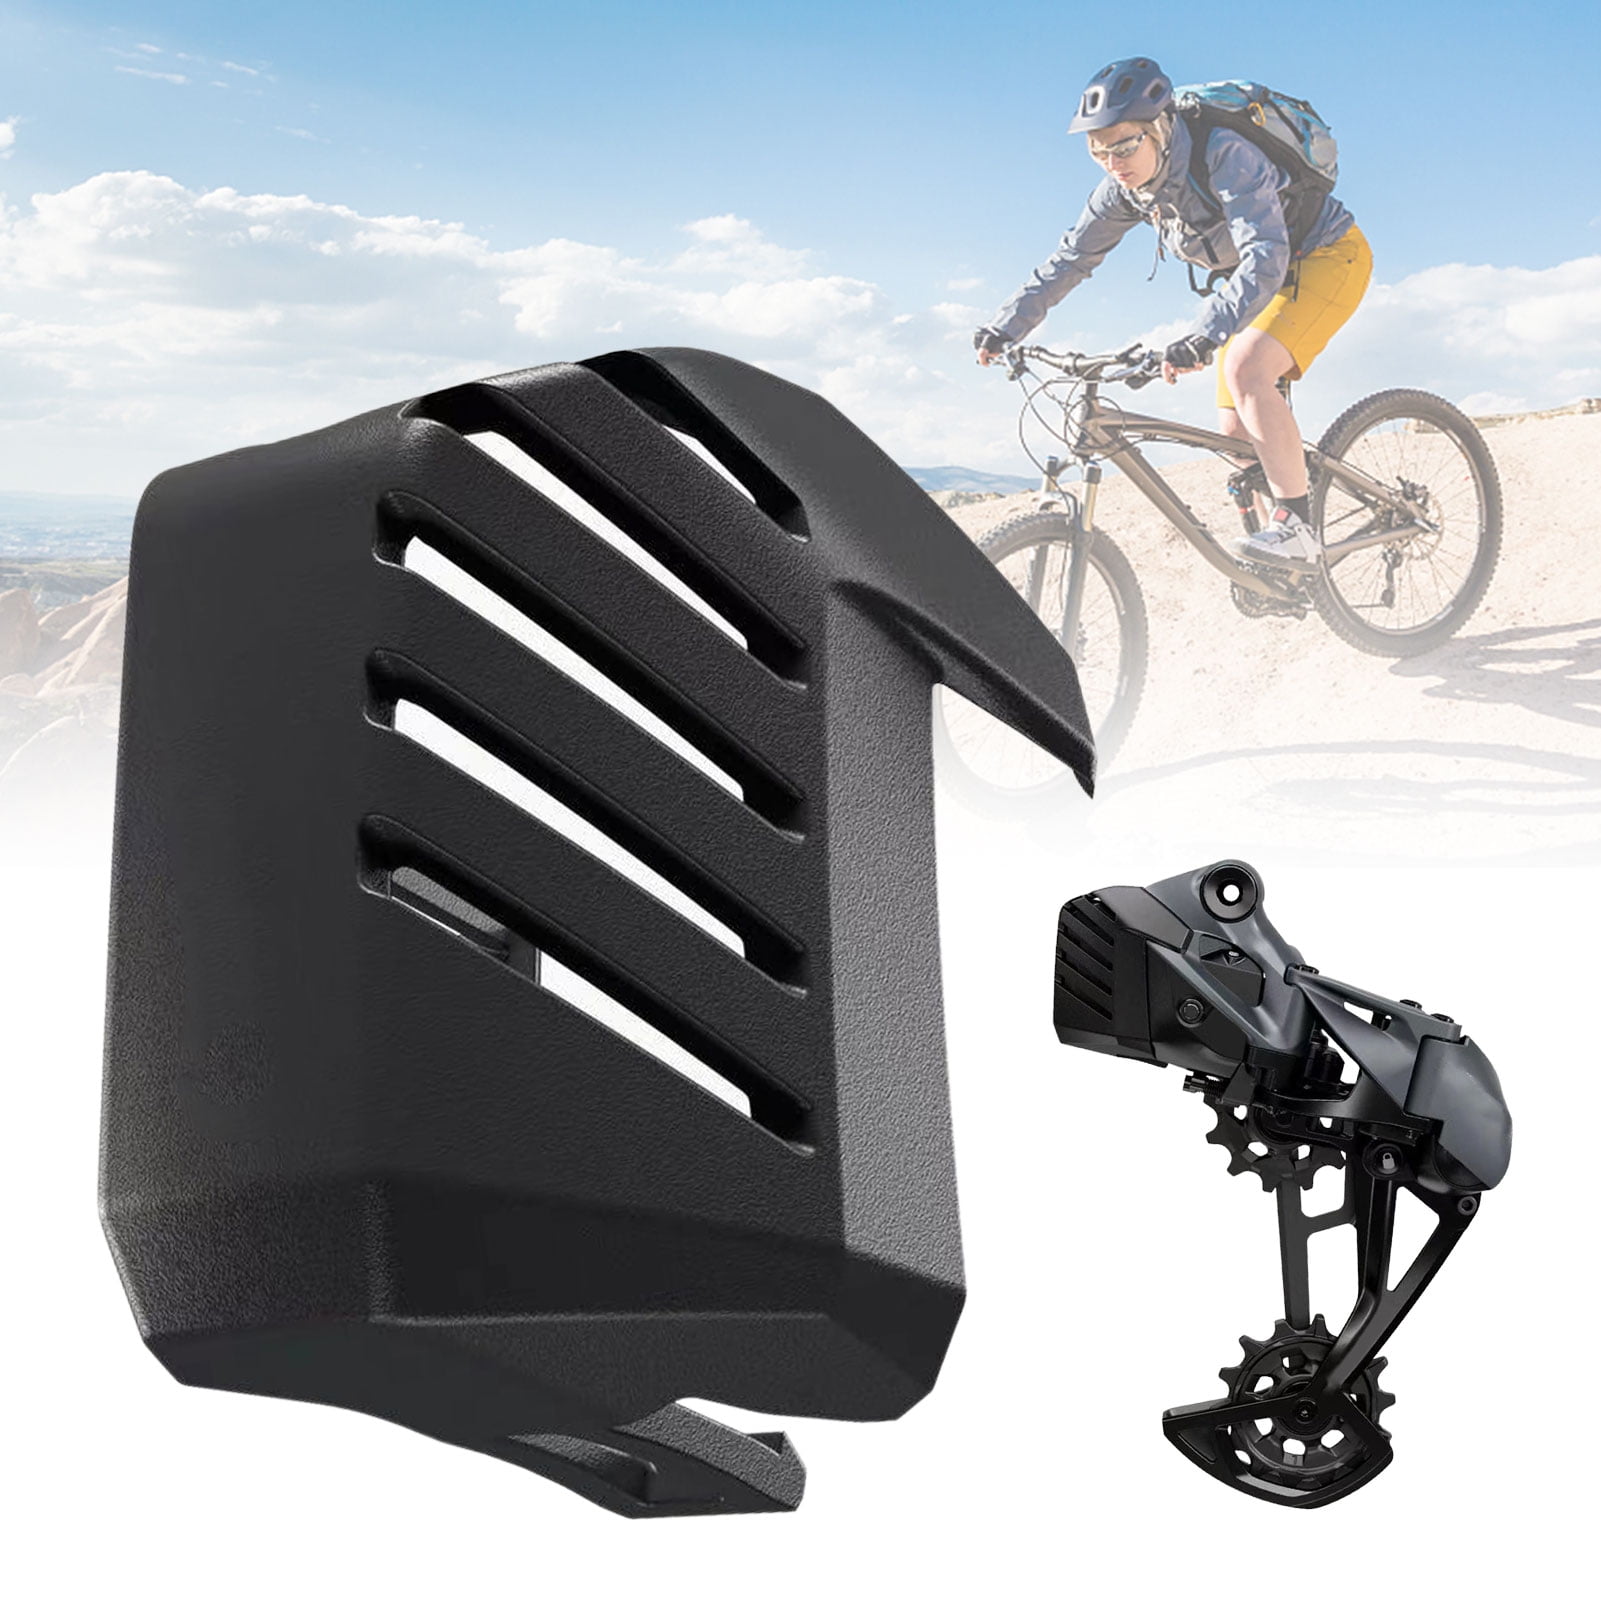 Rear Derailleur Cover Durable Cover Suitable for All AXS Mountain Bike Transmissions SRAM AXS GX XX1 X1 X01 Electronic Gear Shift Rear Derailleur Battery Protective Cover 